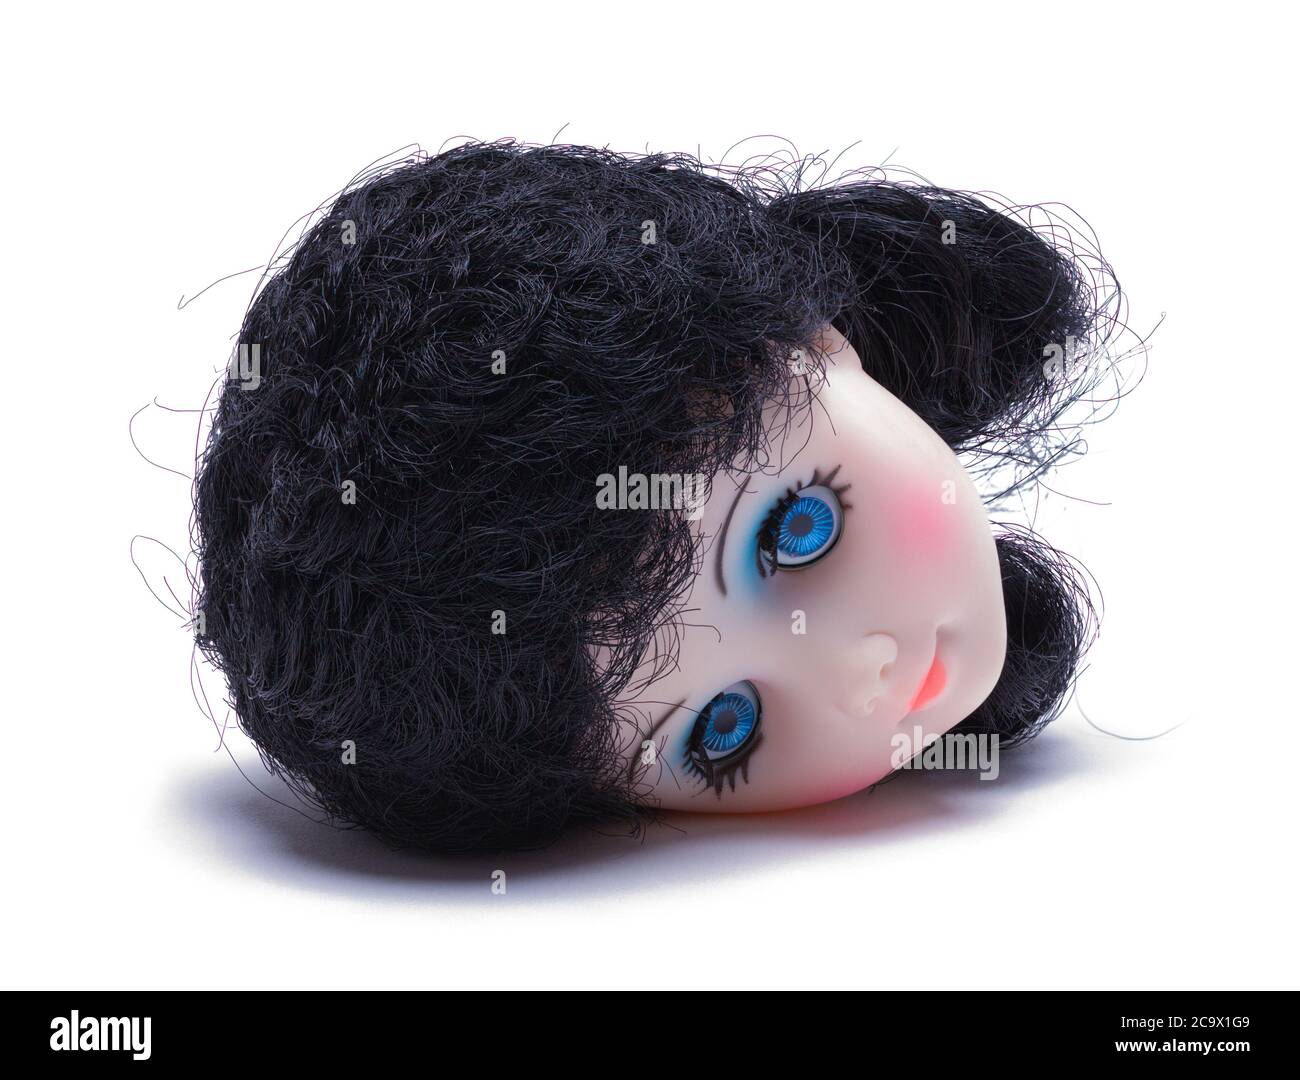 Toy Baby Doll Head Isolated on White Background. Stock Photo